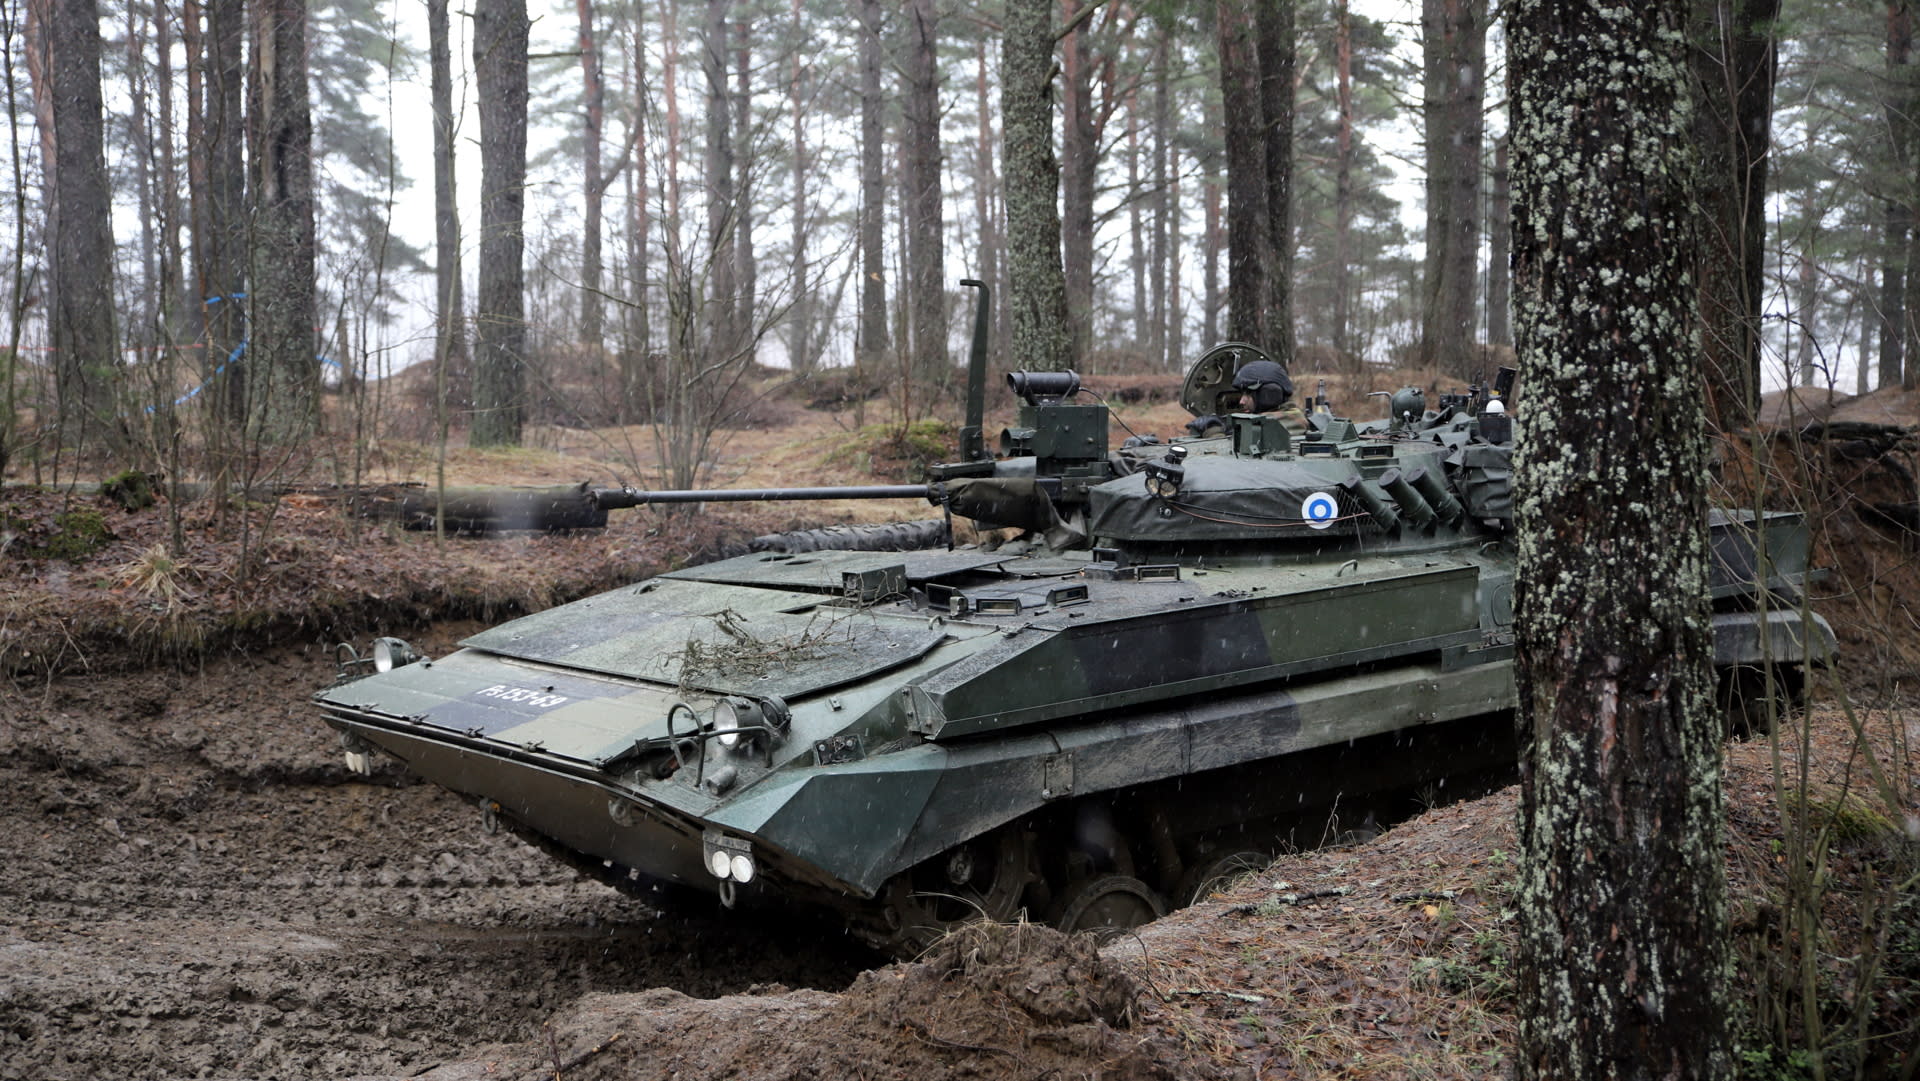 Two tanks collide during a military exercise in Finland